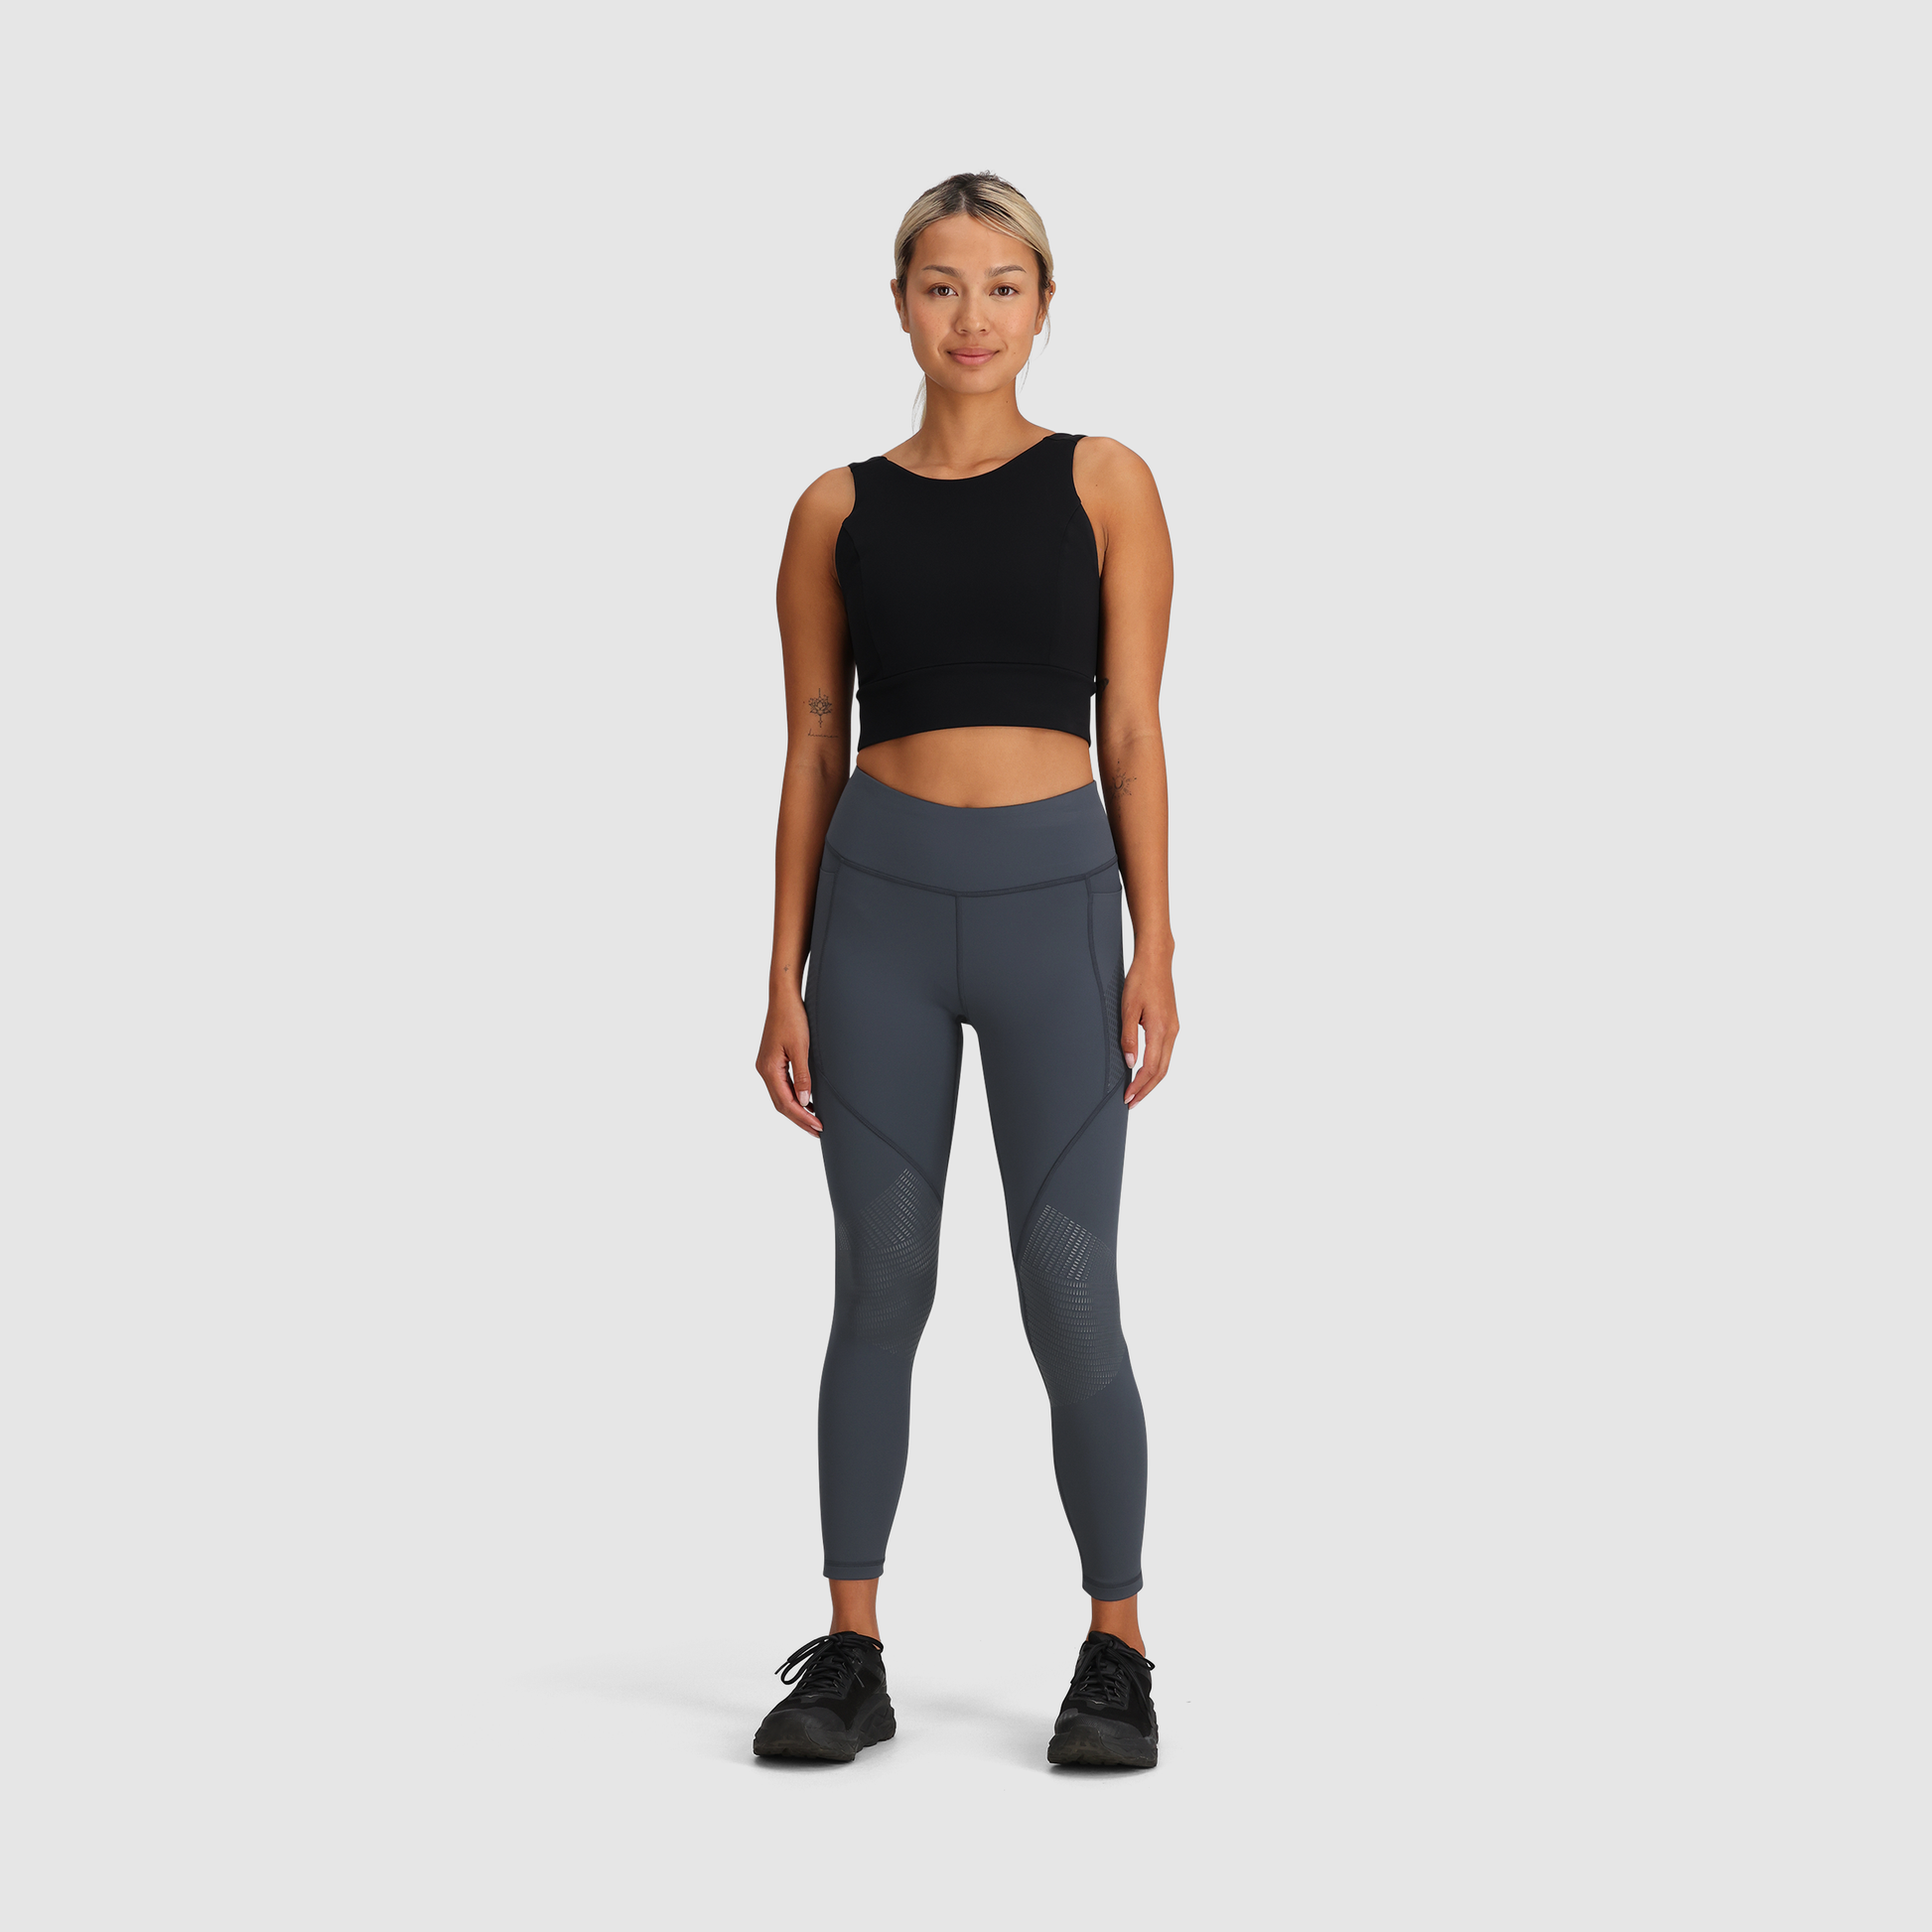 Gym Wear New Wholesale Mesh Leggings Quick Dry Cycling Pant Woman